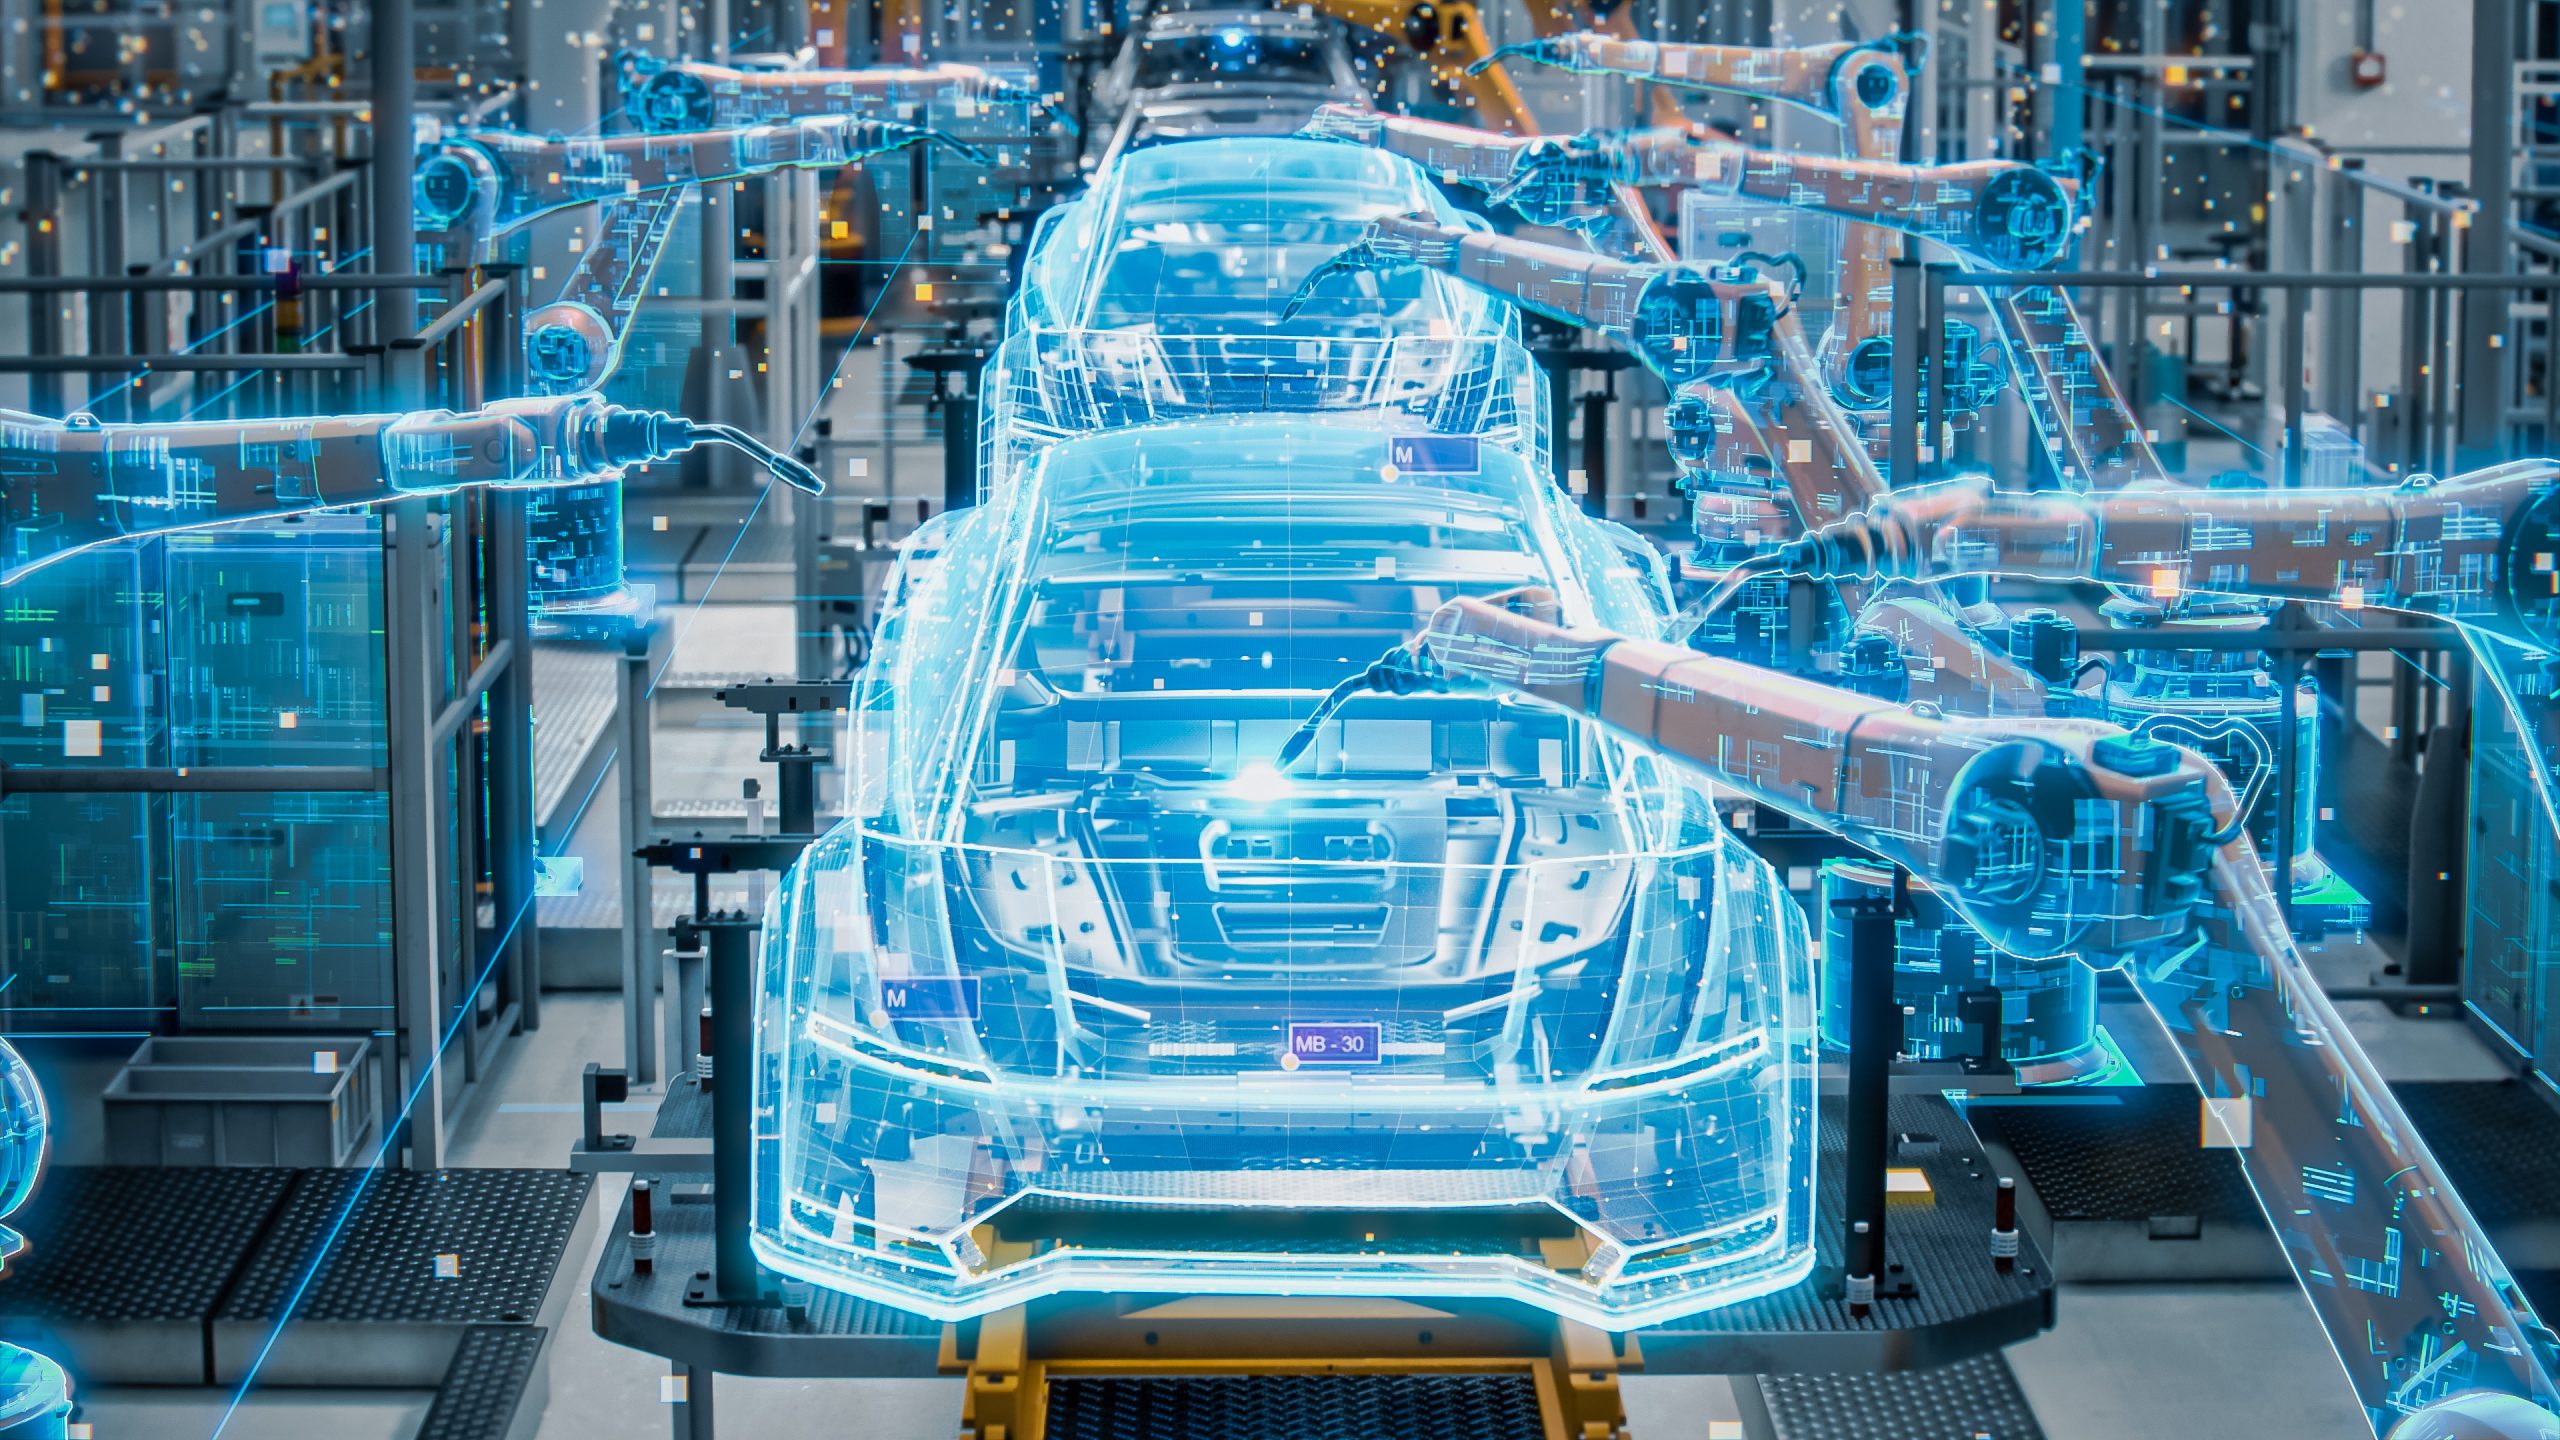 Car assembly line where automated robot arms are used for manufacturing electric vehicles.